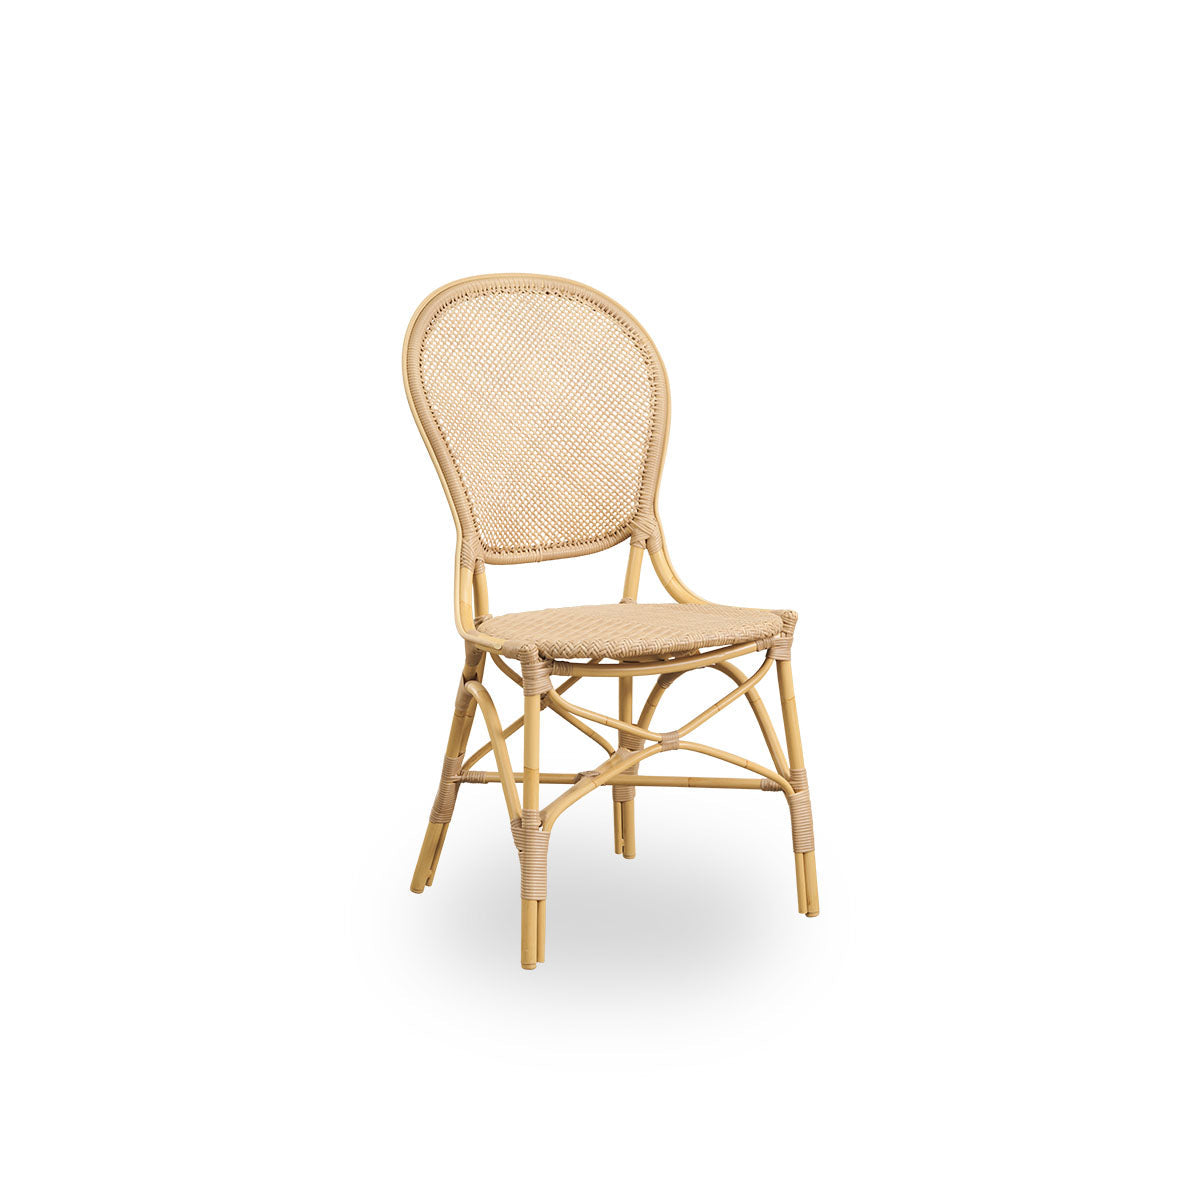 Rossini Exterior Side Chair by Sika